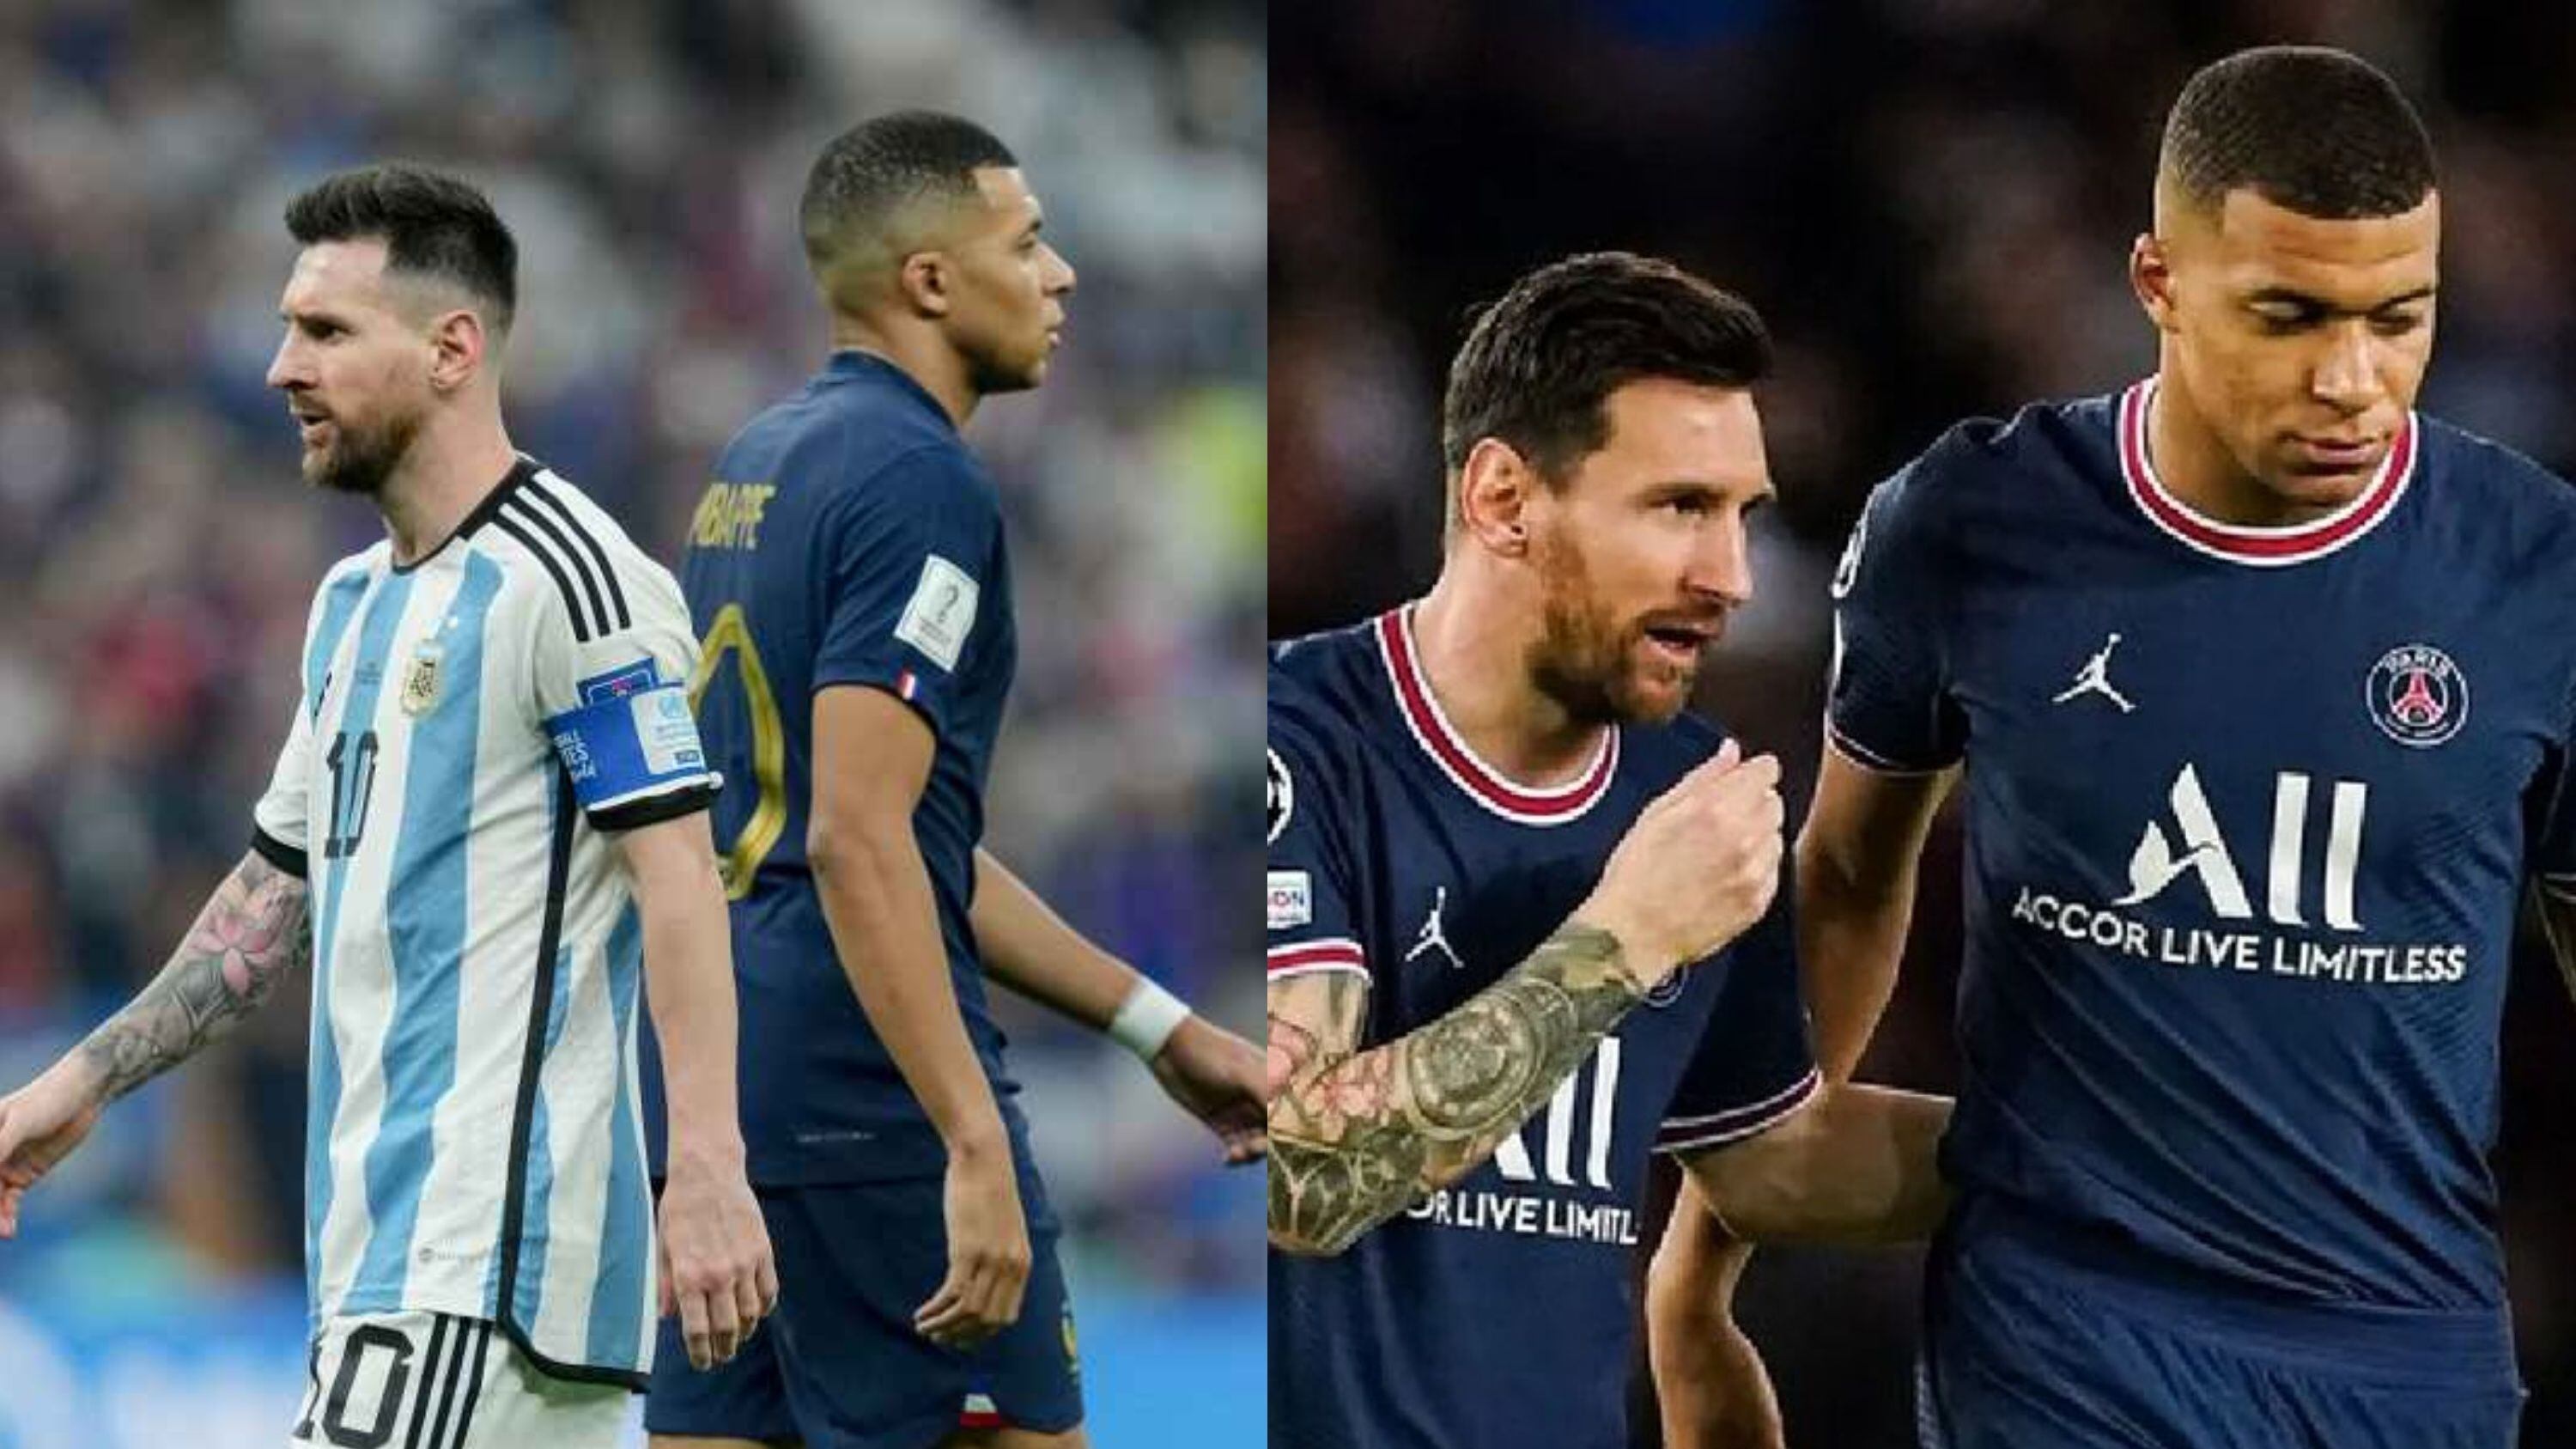 While Ethan Mbappé didn't like seeing Messi, what Marco Verratti did and made Mbappe mad